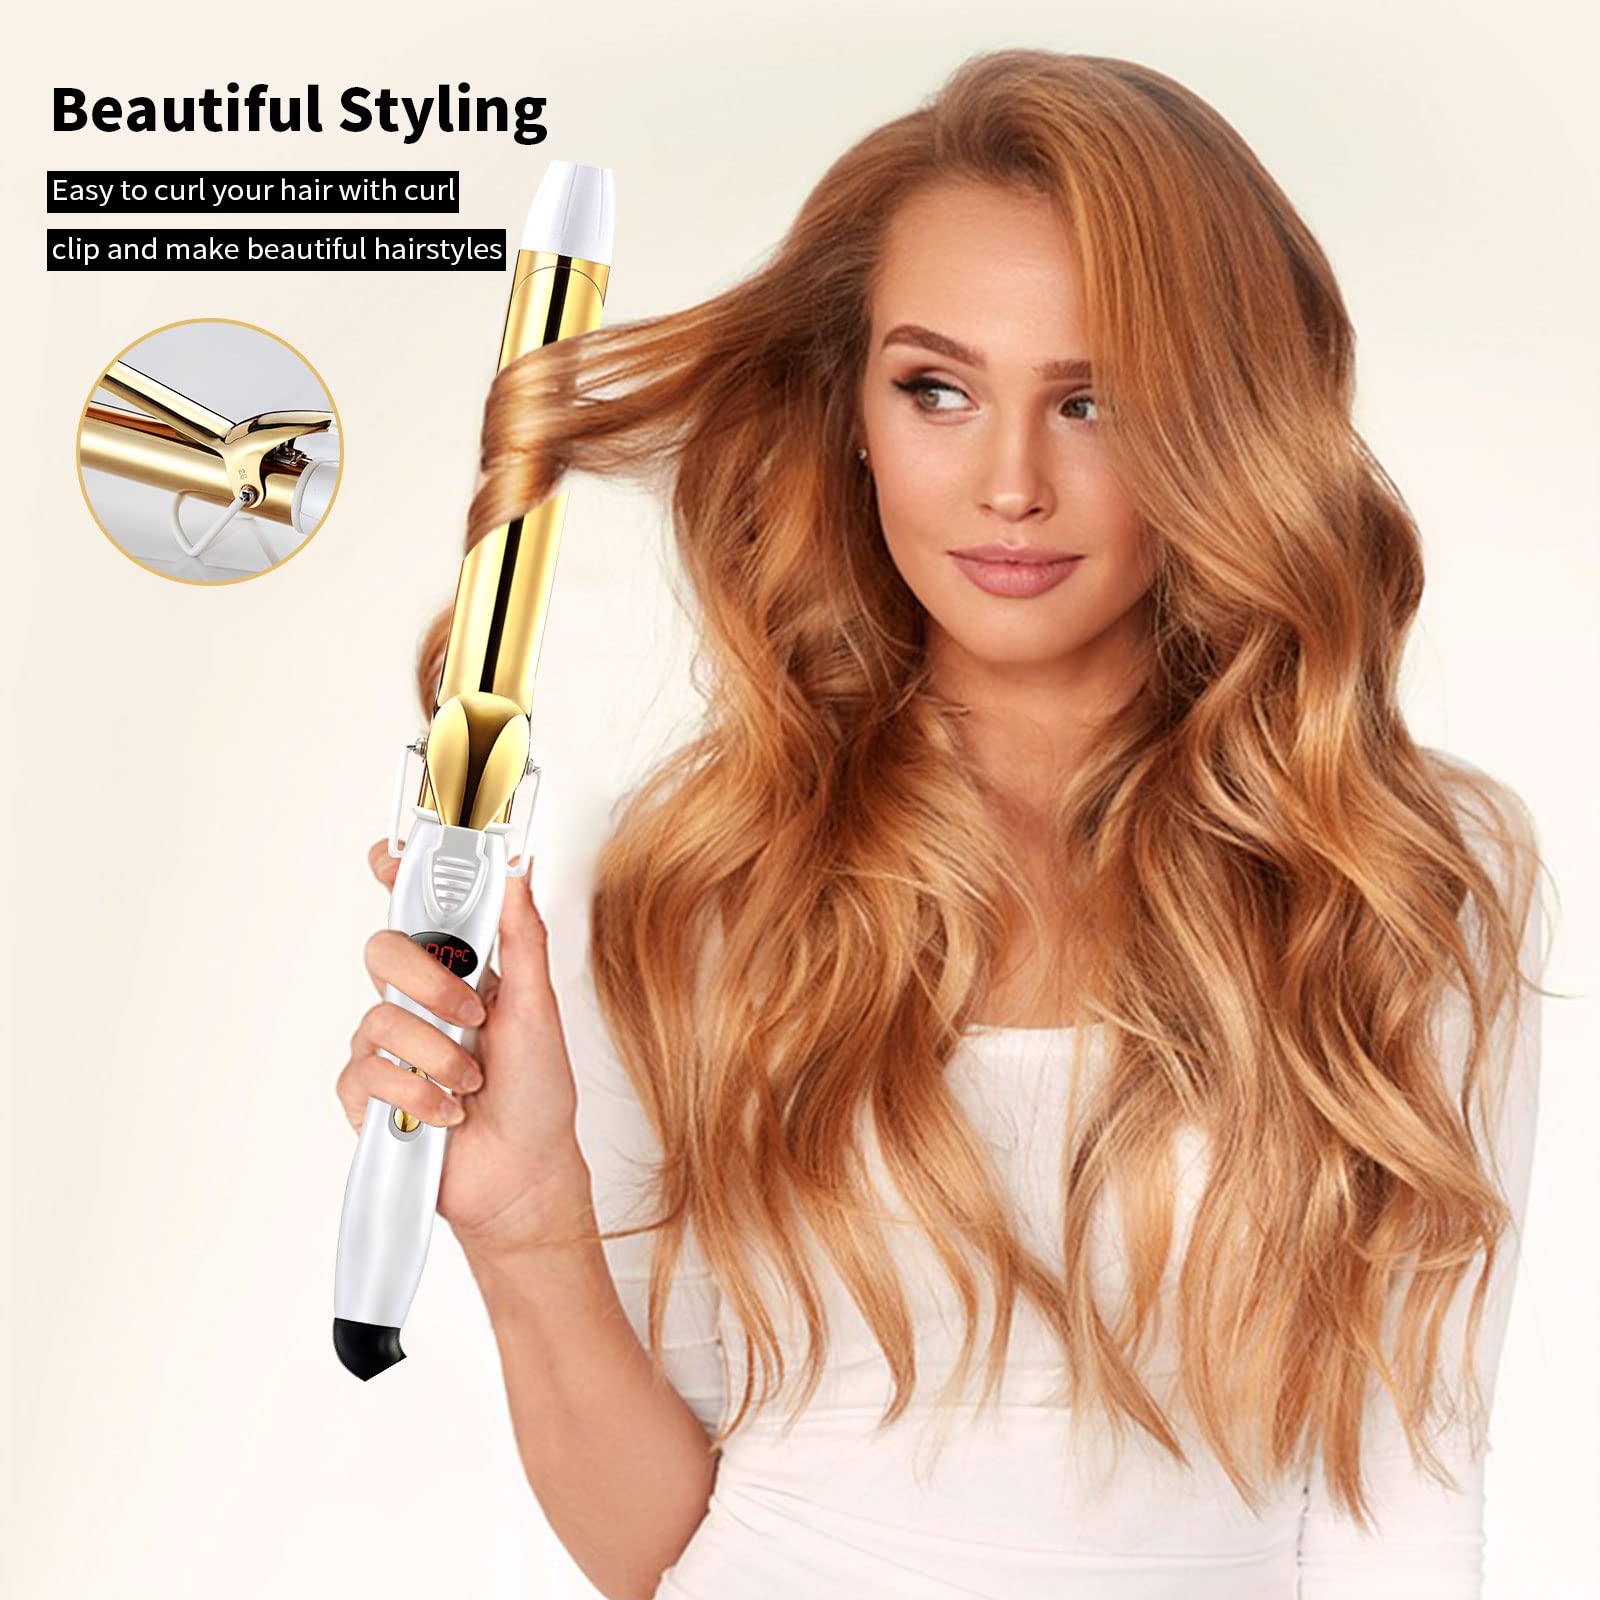 Rosy Forth Curling Iron 32mm with Ceramic Coating Barrel, Professional Curling Wand Instant Heat up, Gold Hair Curler with LCD Display (OPEN-BOX)